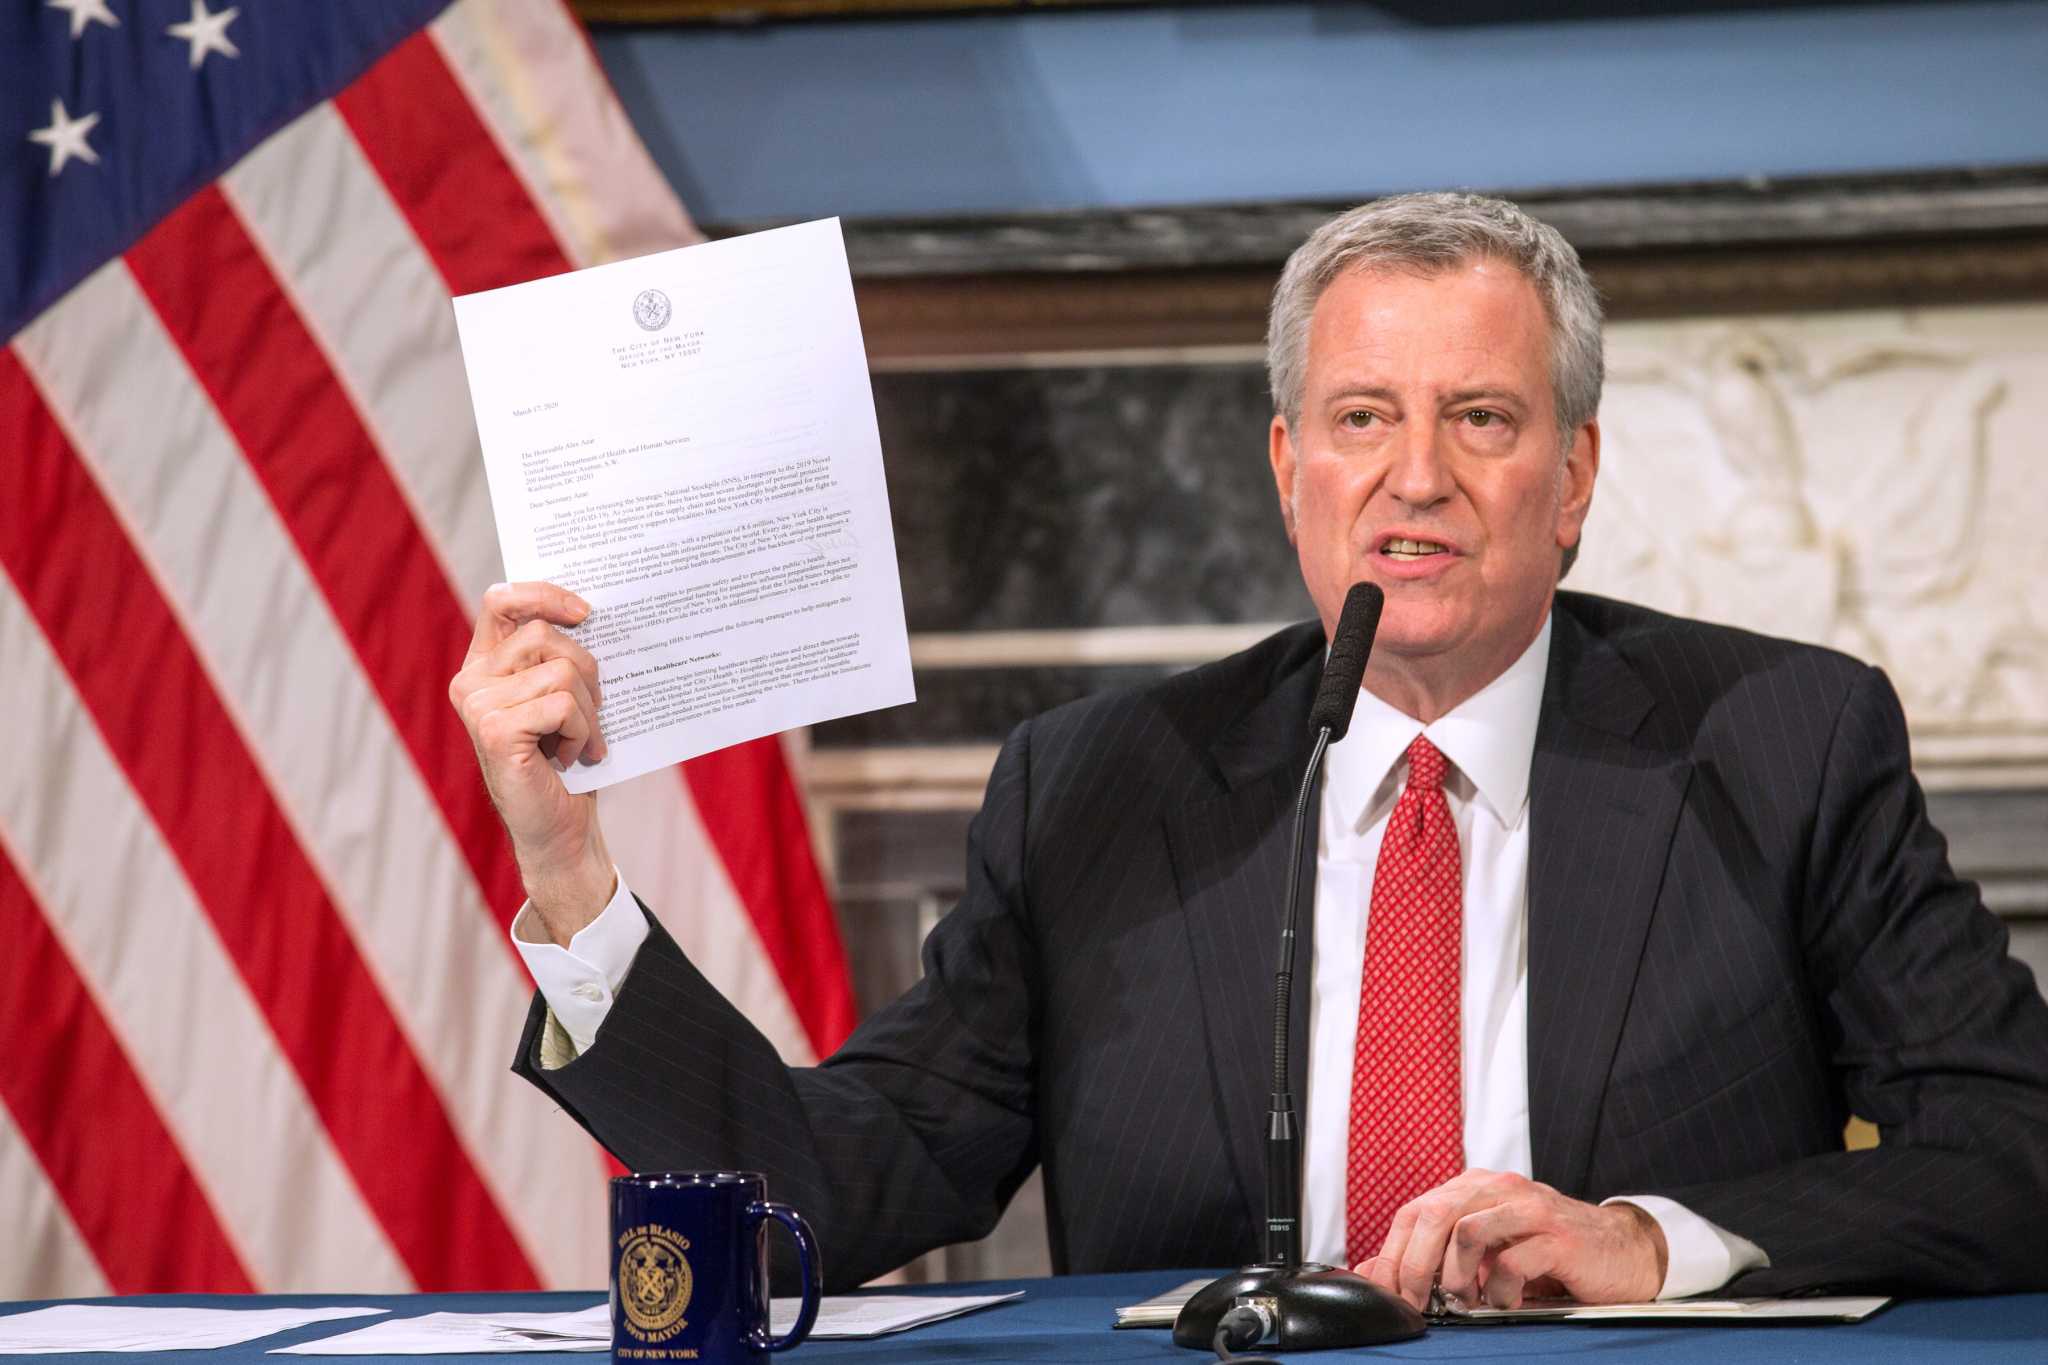 NYC will close schools, nonessential businesses in 9 ZIP codes, de Blasio  says - Newsday